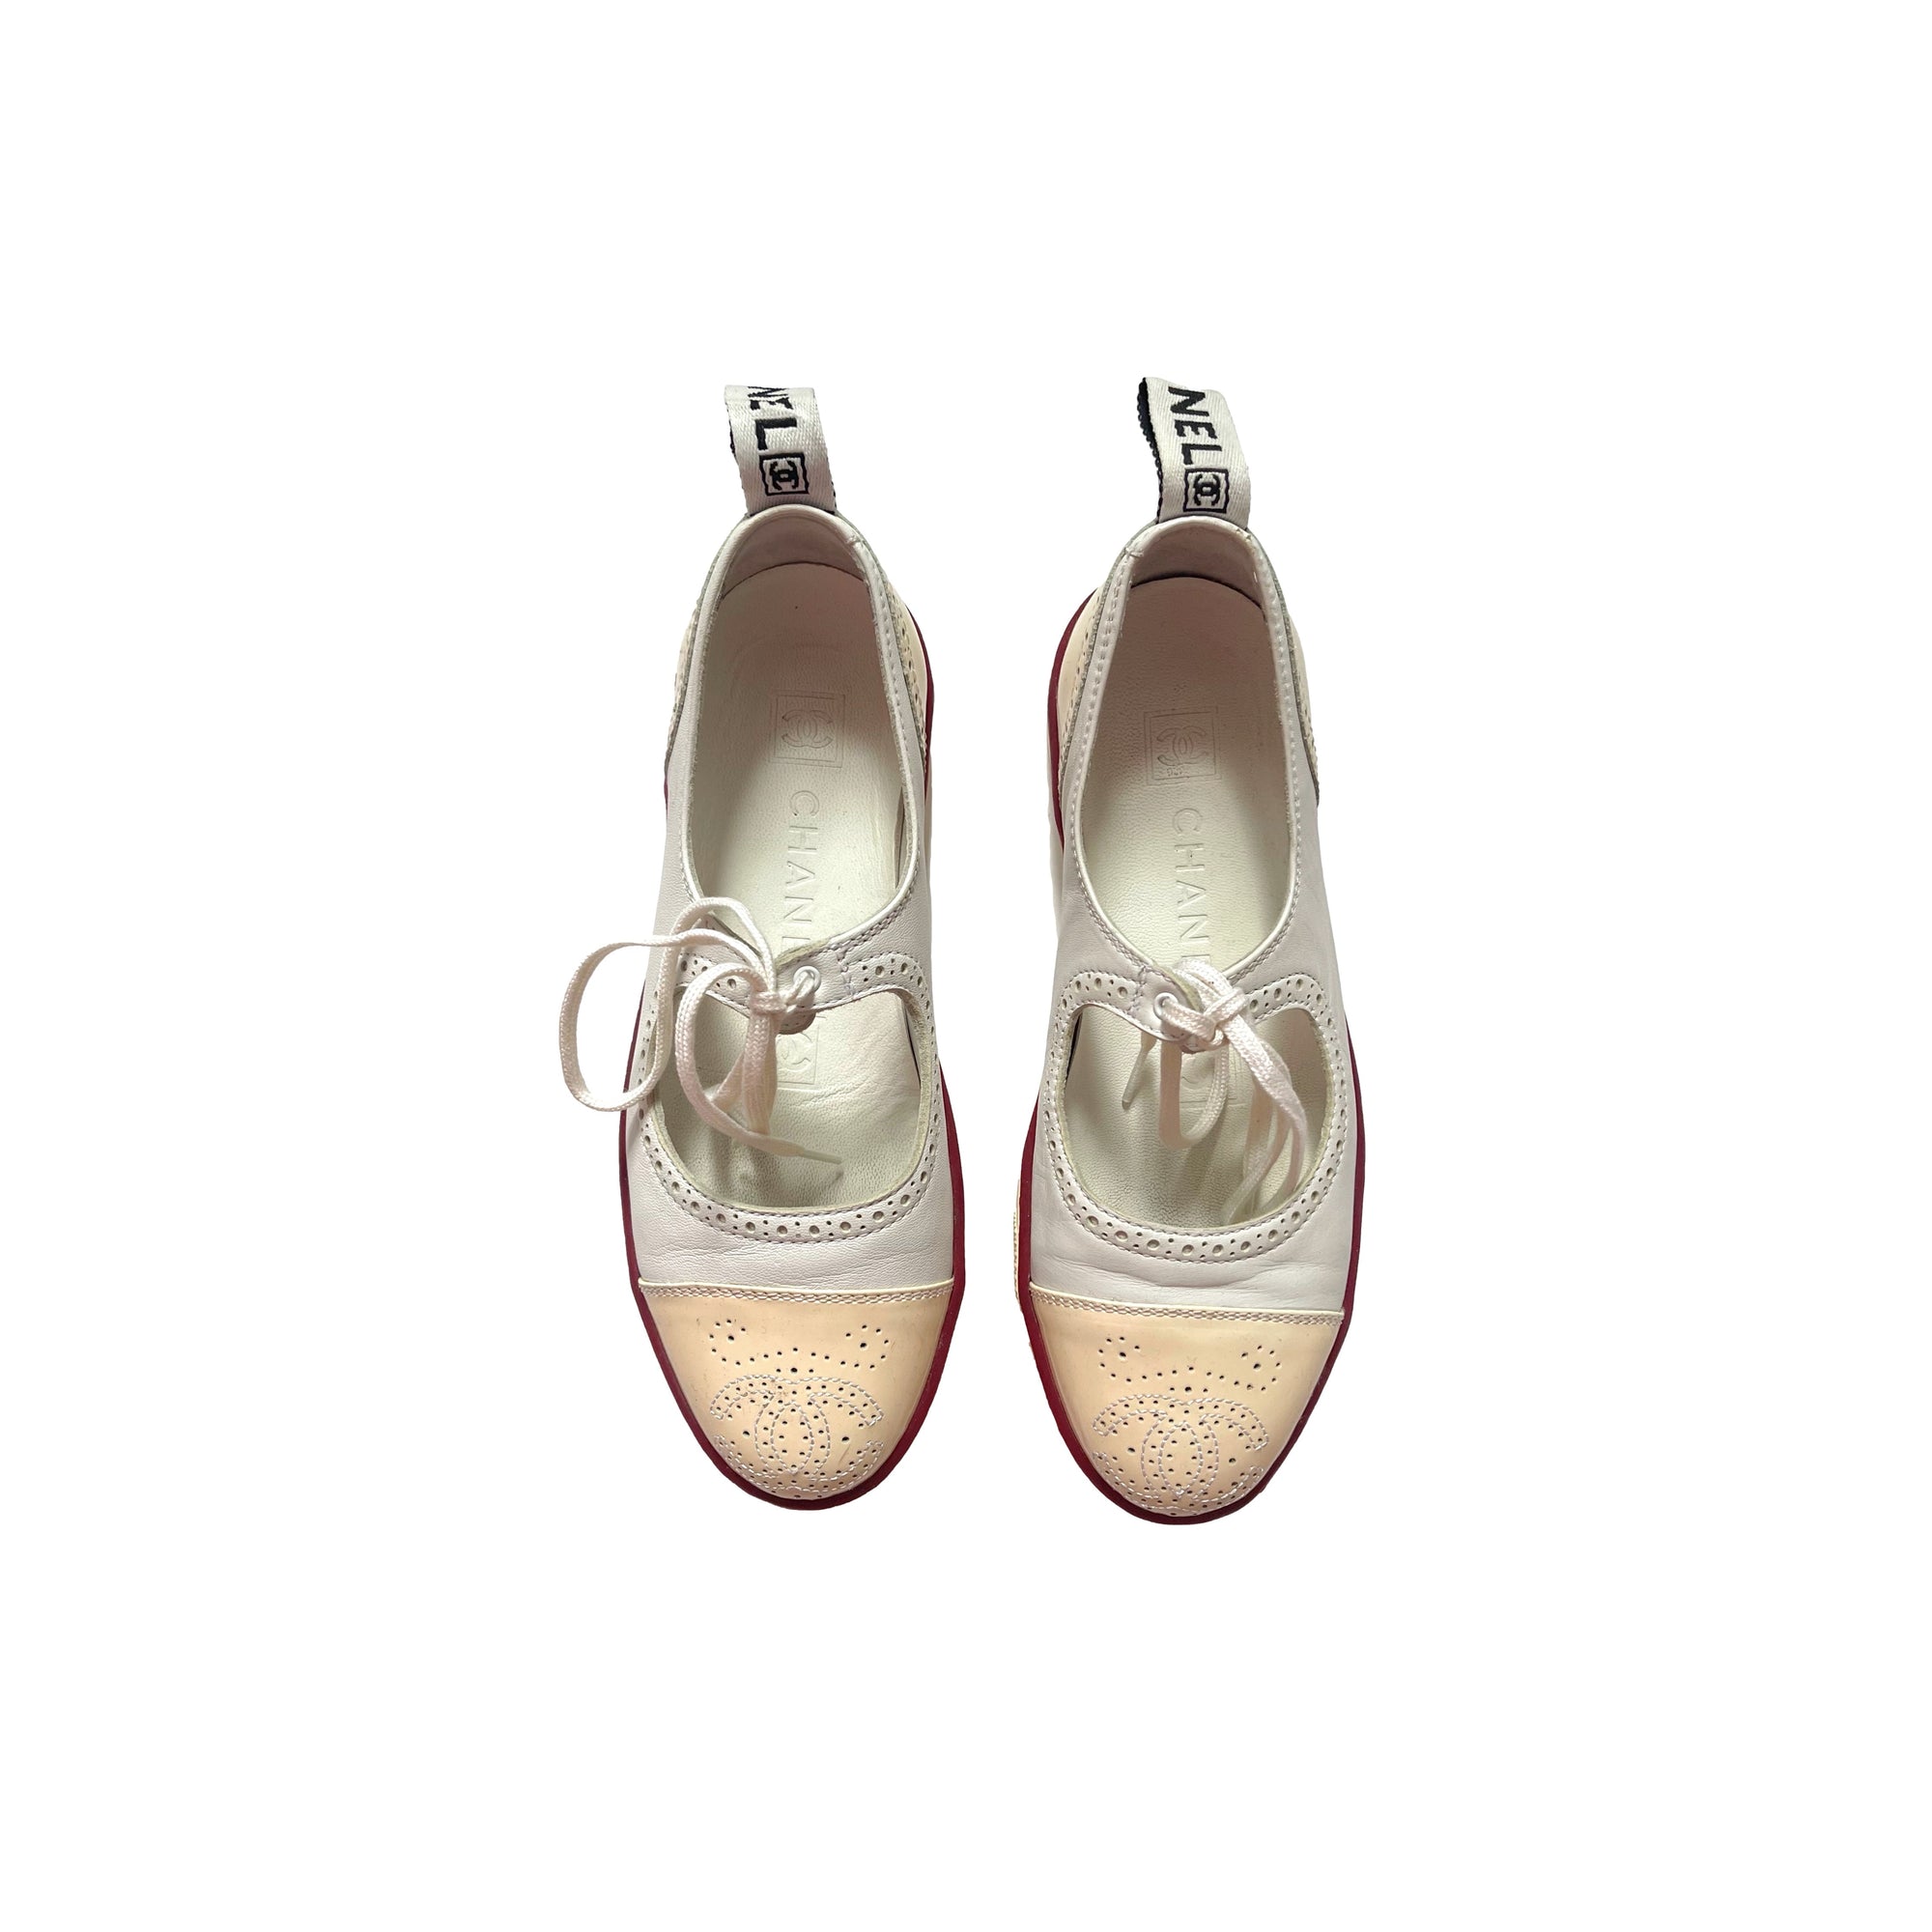 Chanel Beige Logo Mary Janes - Shoes